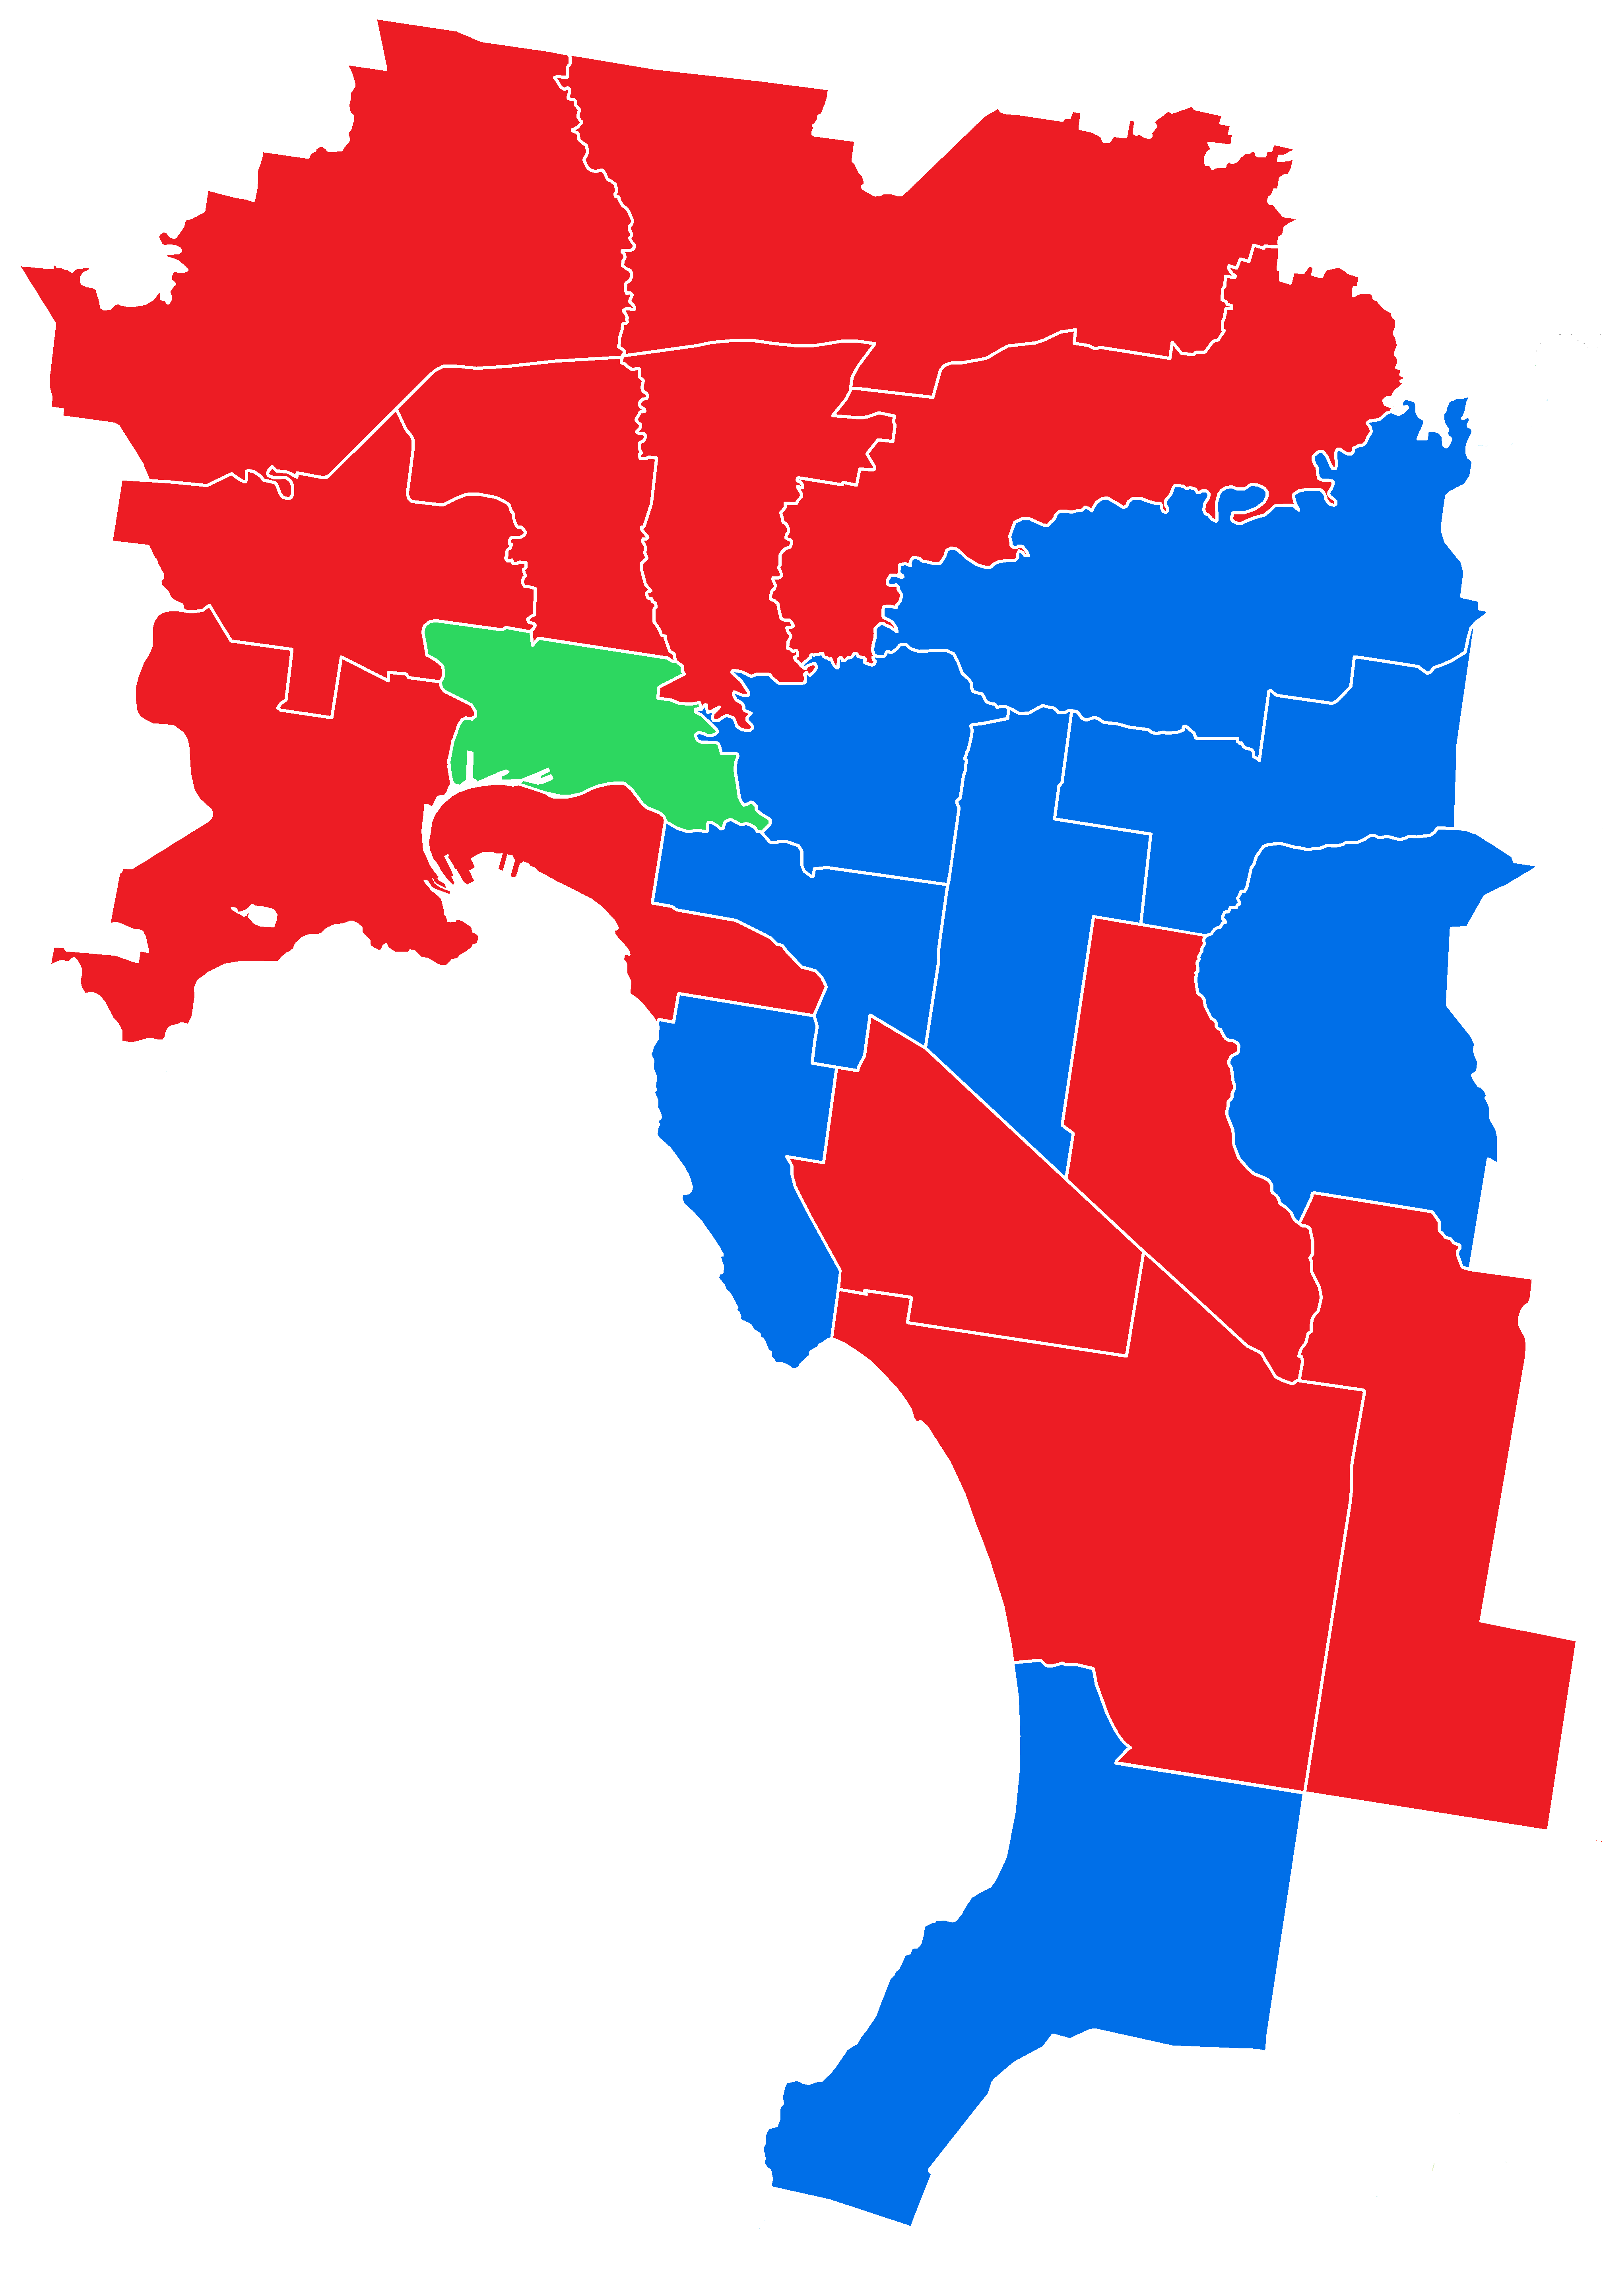 File Results Of The Australian Federal Election In Melbourne 2016 Png Wikimedia Commons